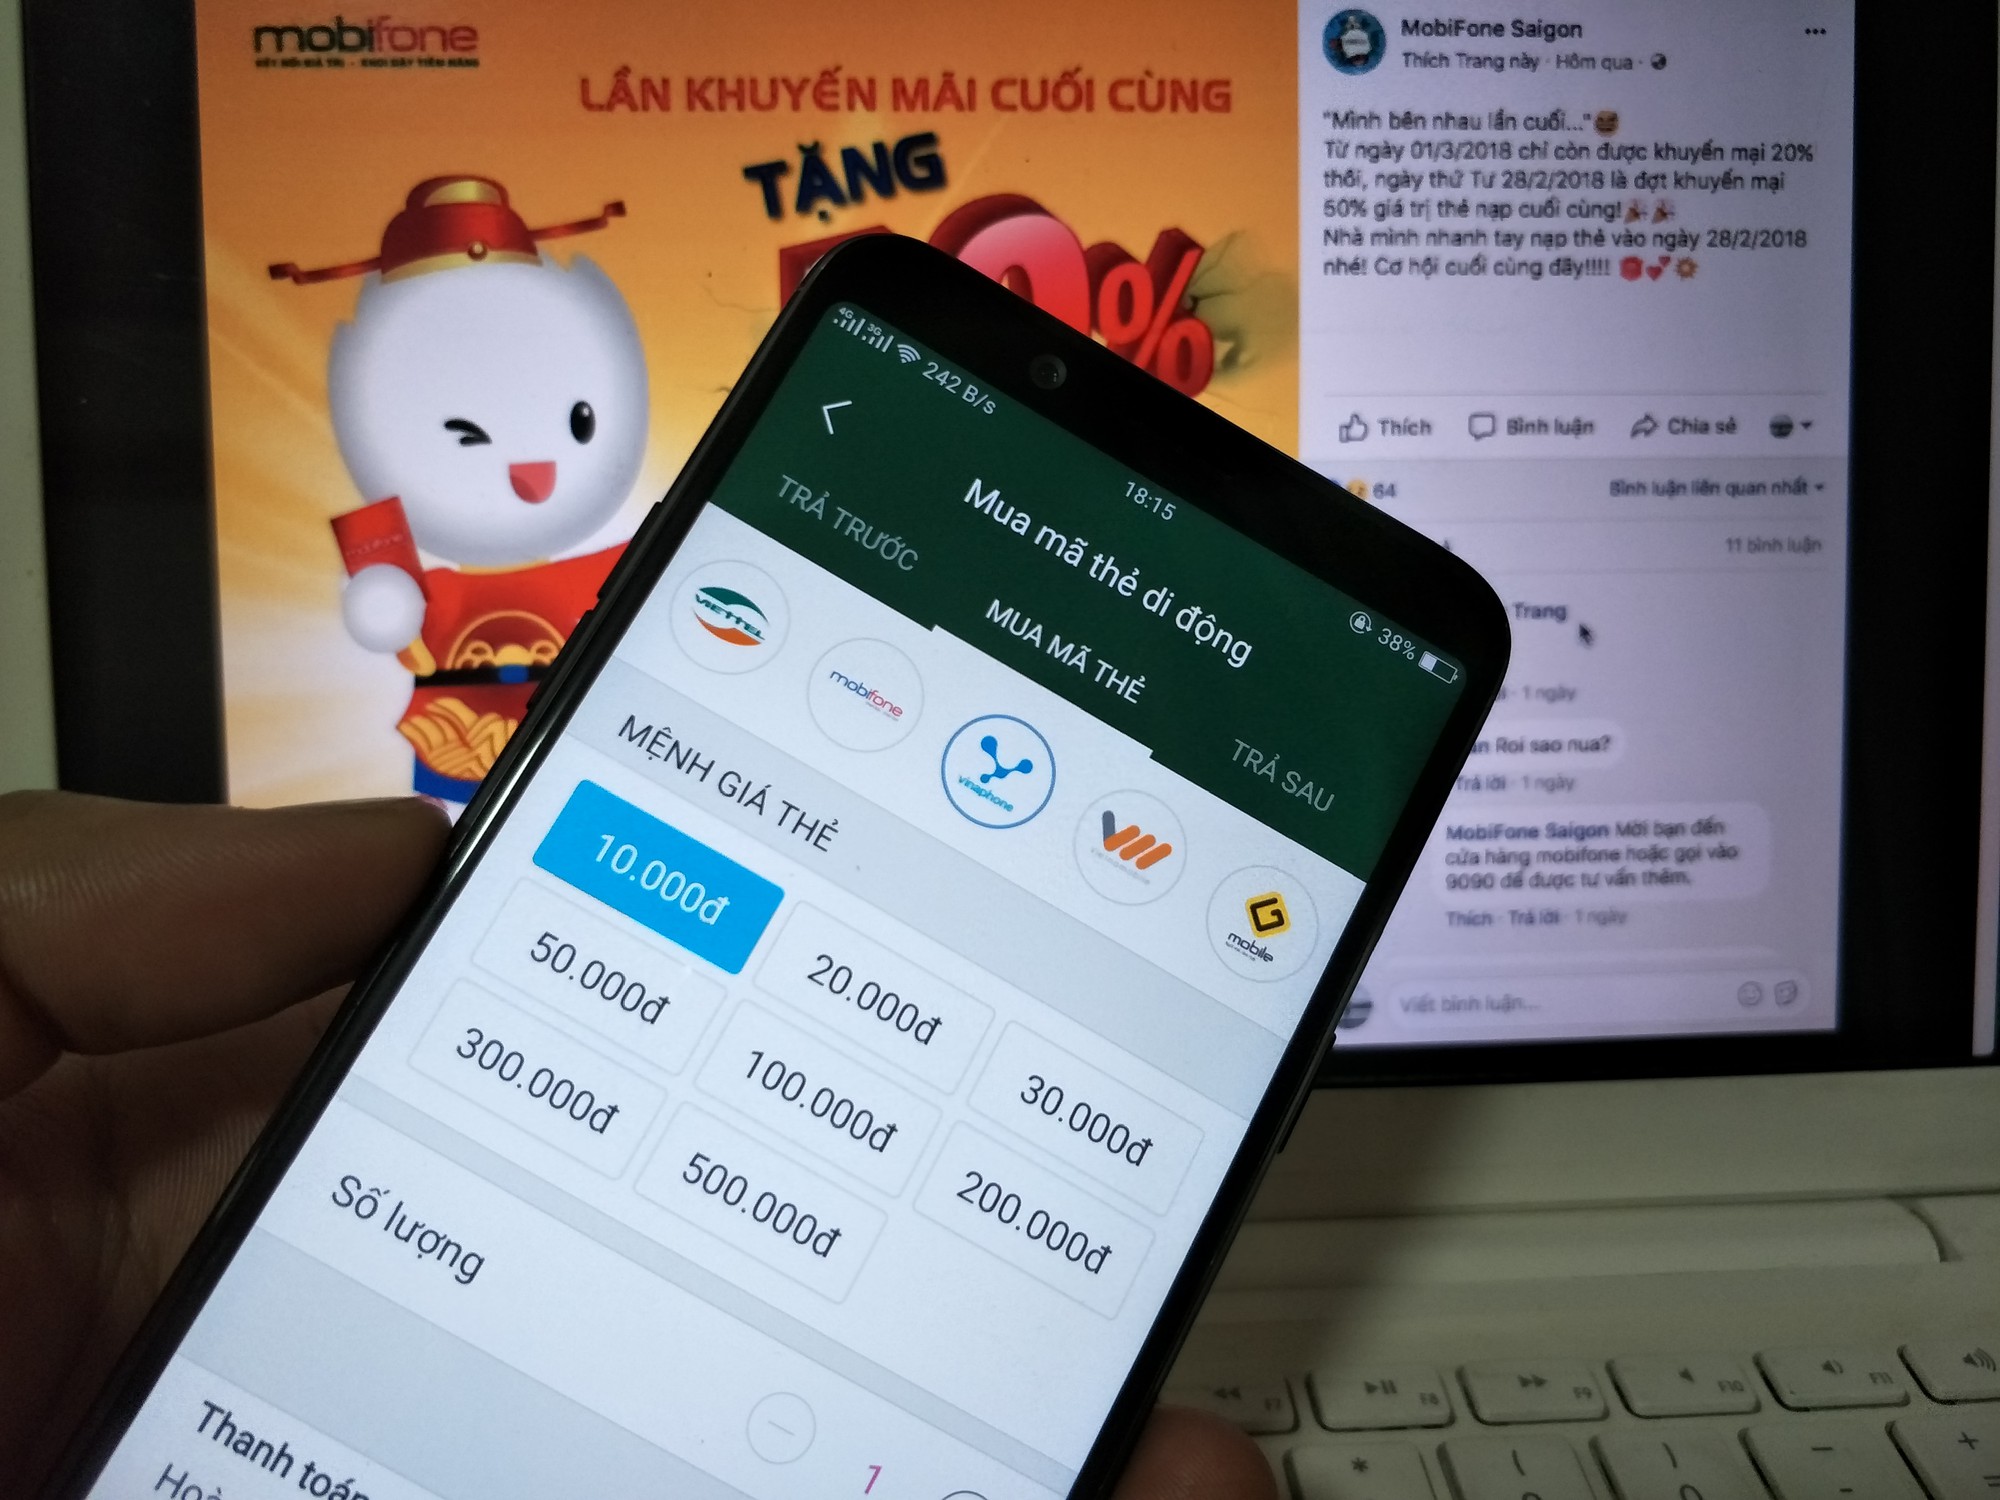 Vietnam networks jammed as users go ‘all-in’ on last day of 50% top-up bonus